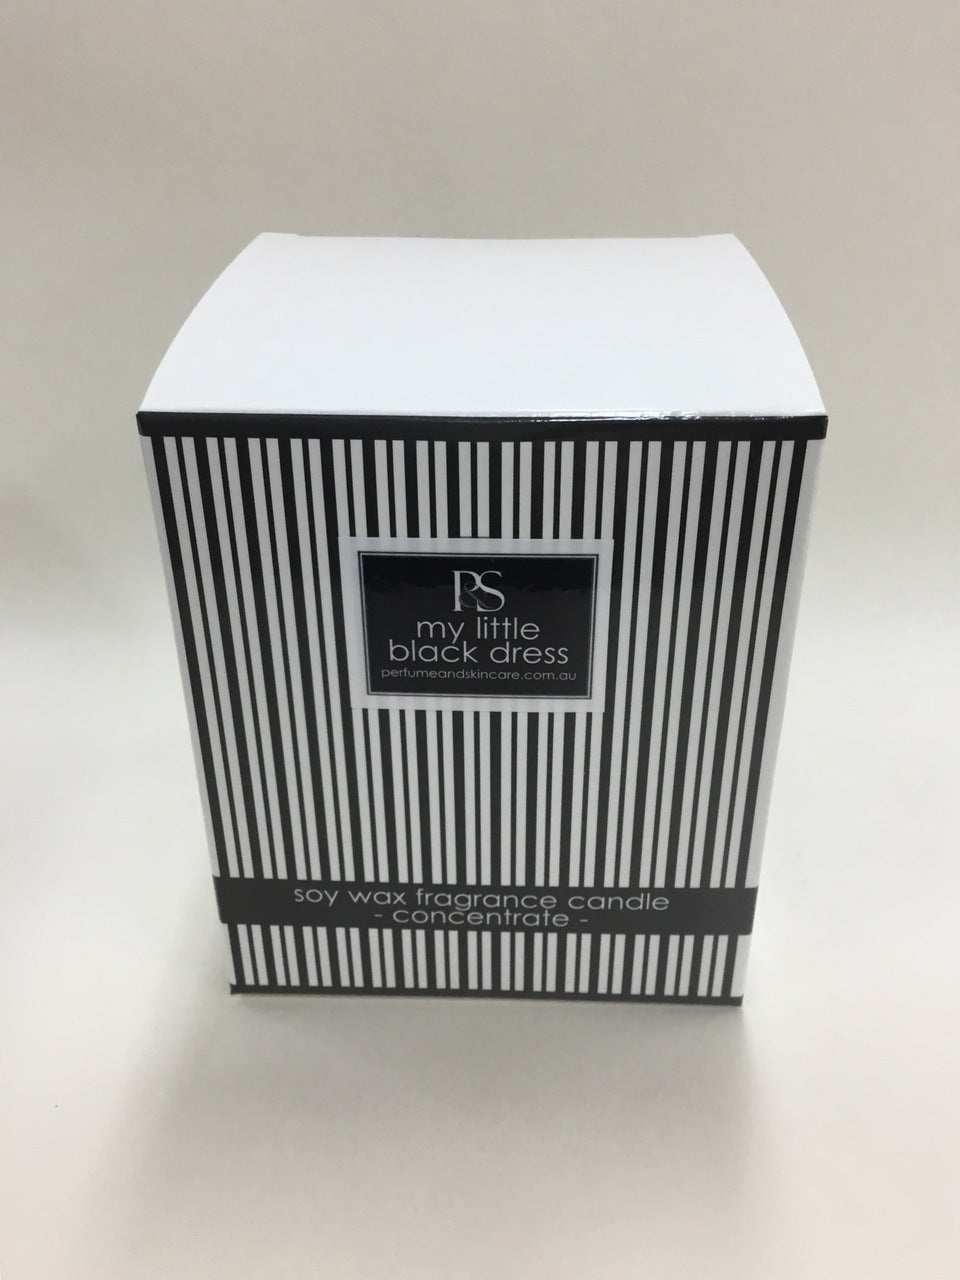 My Little Black Dress Pure Soy Wax Candle - 200 gm